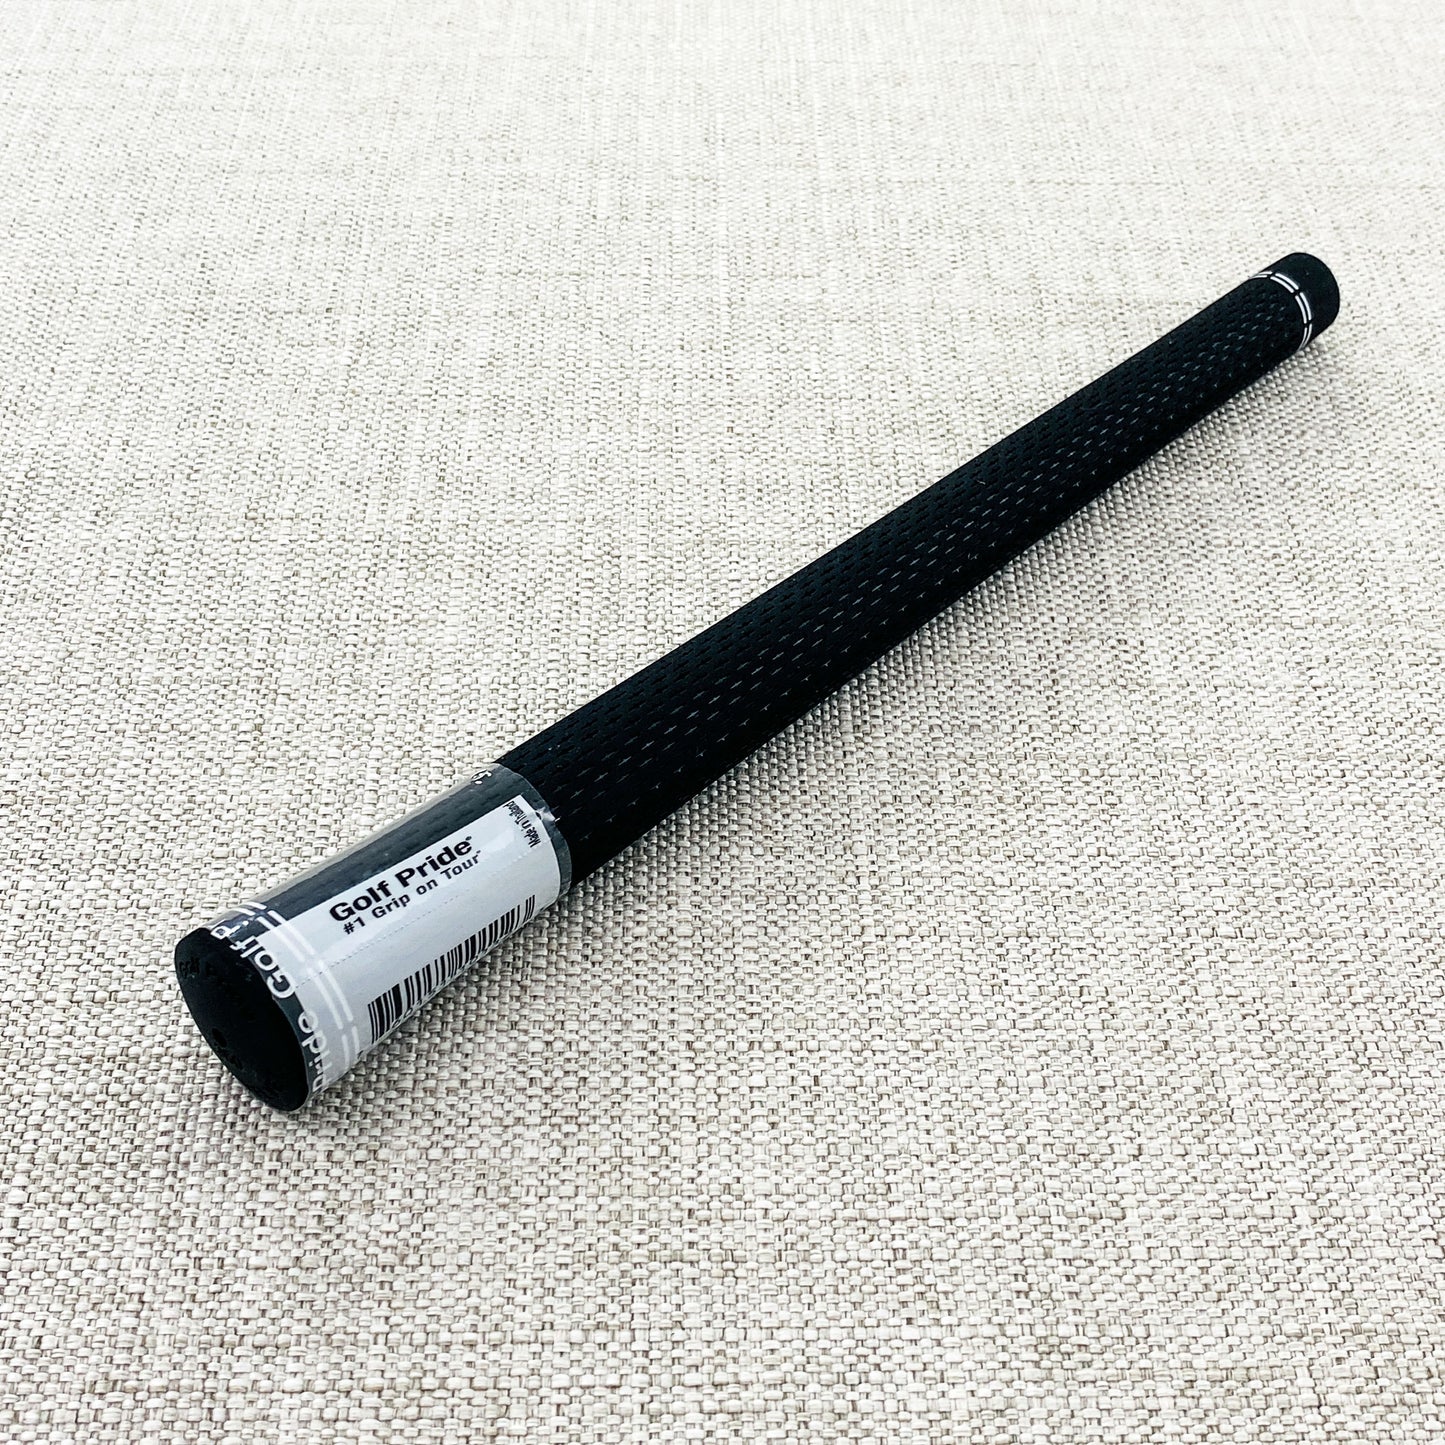 Golf Pride Tour Velvet 360 swing grip. Choice of size. Black/White - Price includes fitment.